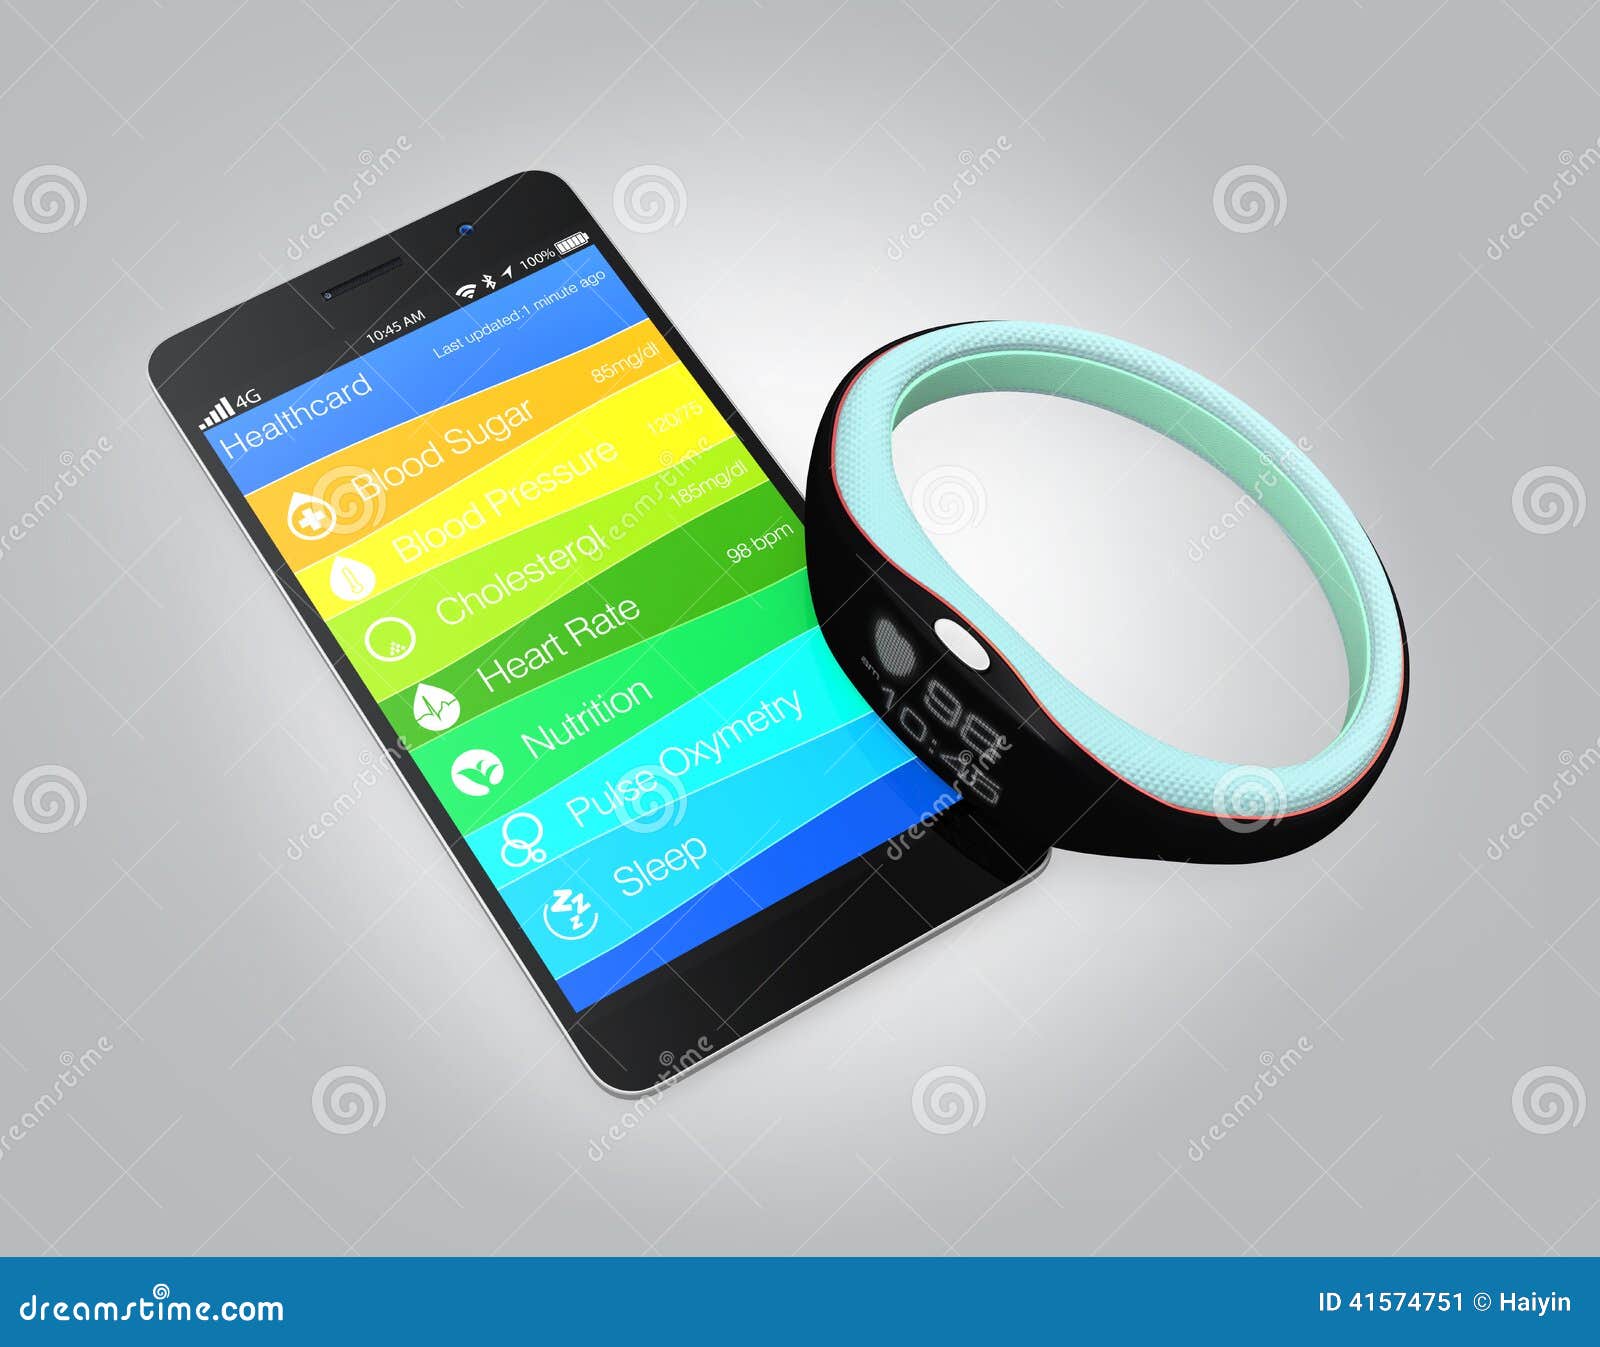 health and fitness information synchronize from smart wristband